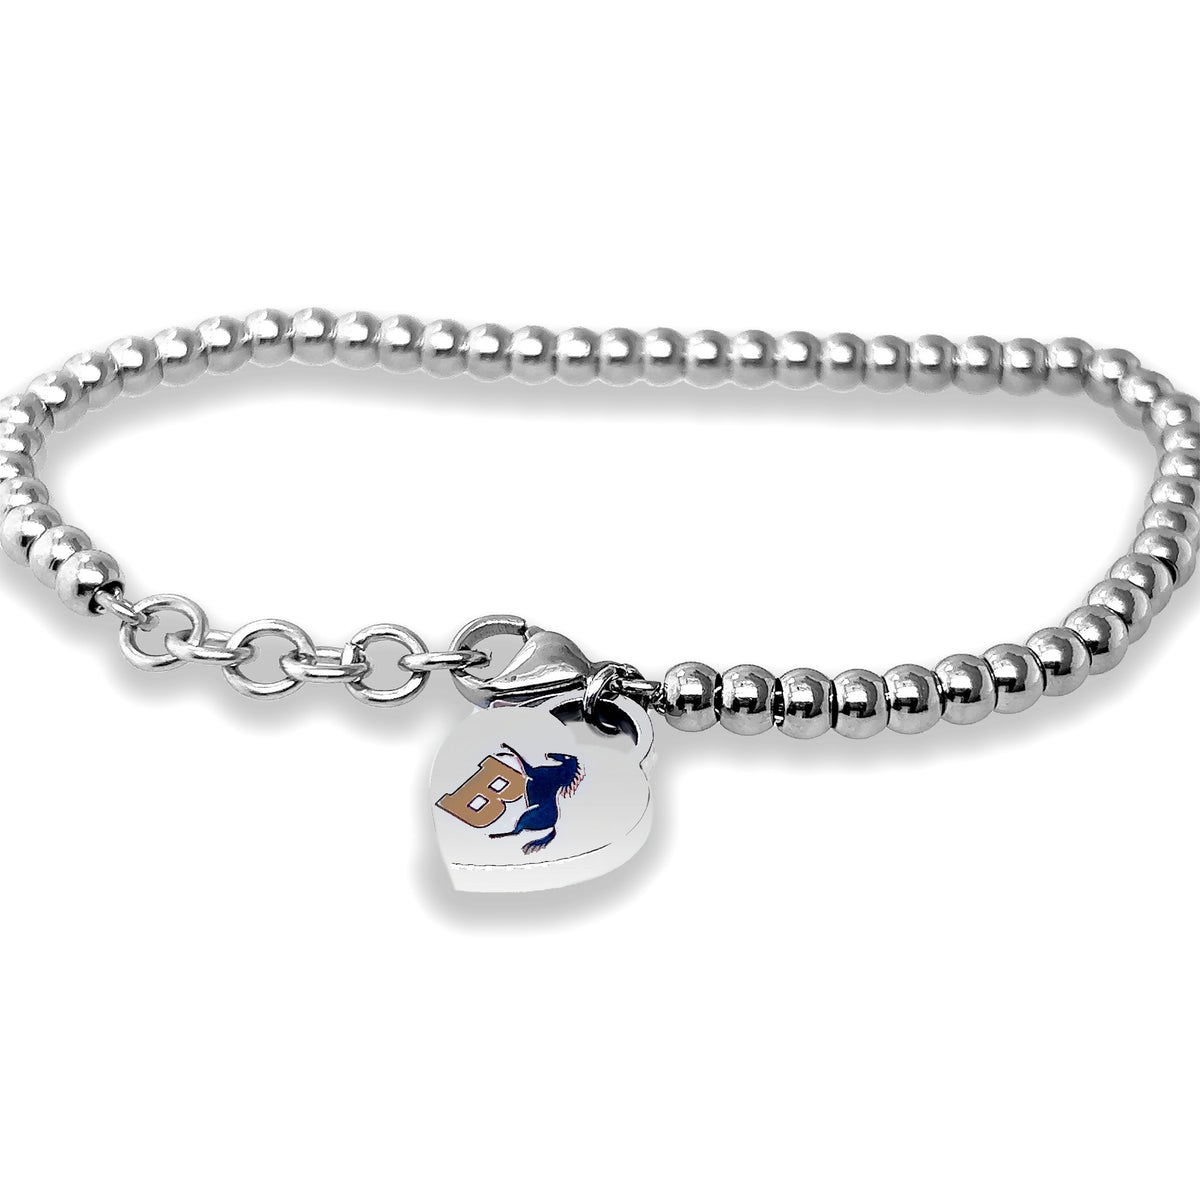 A&C Stainless Steel Bracelet With Heart Charm 16-18 cm